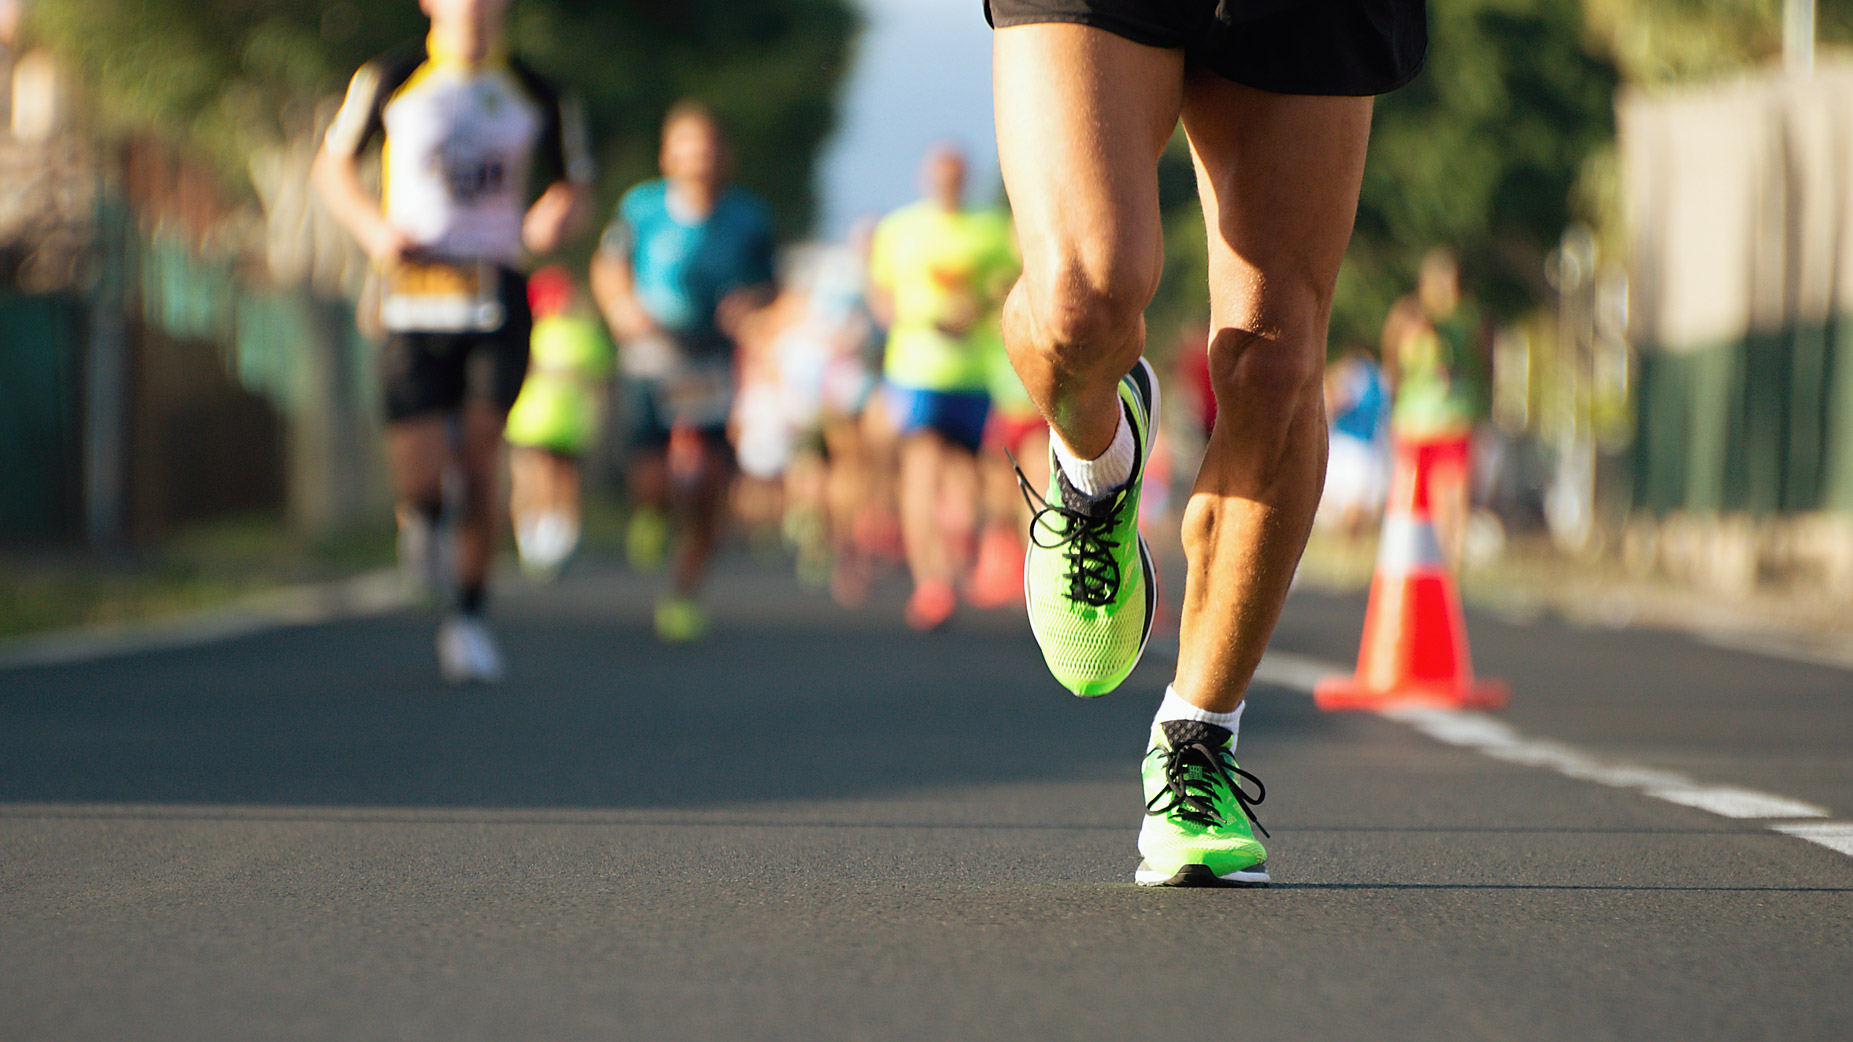 This is the key strategy for running long distances every runner needs ...